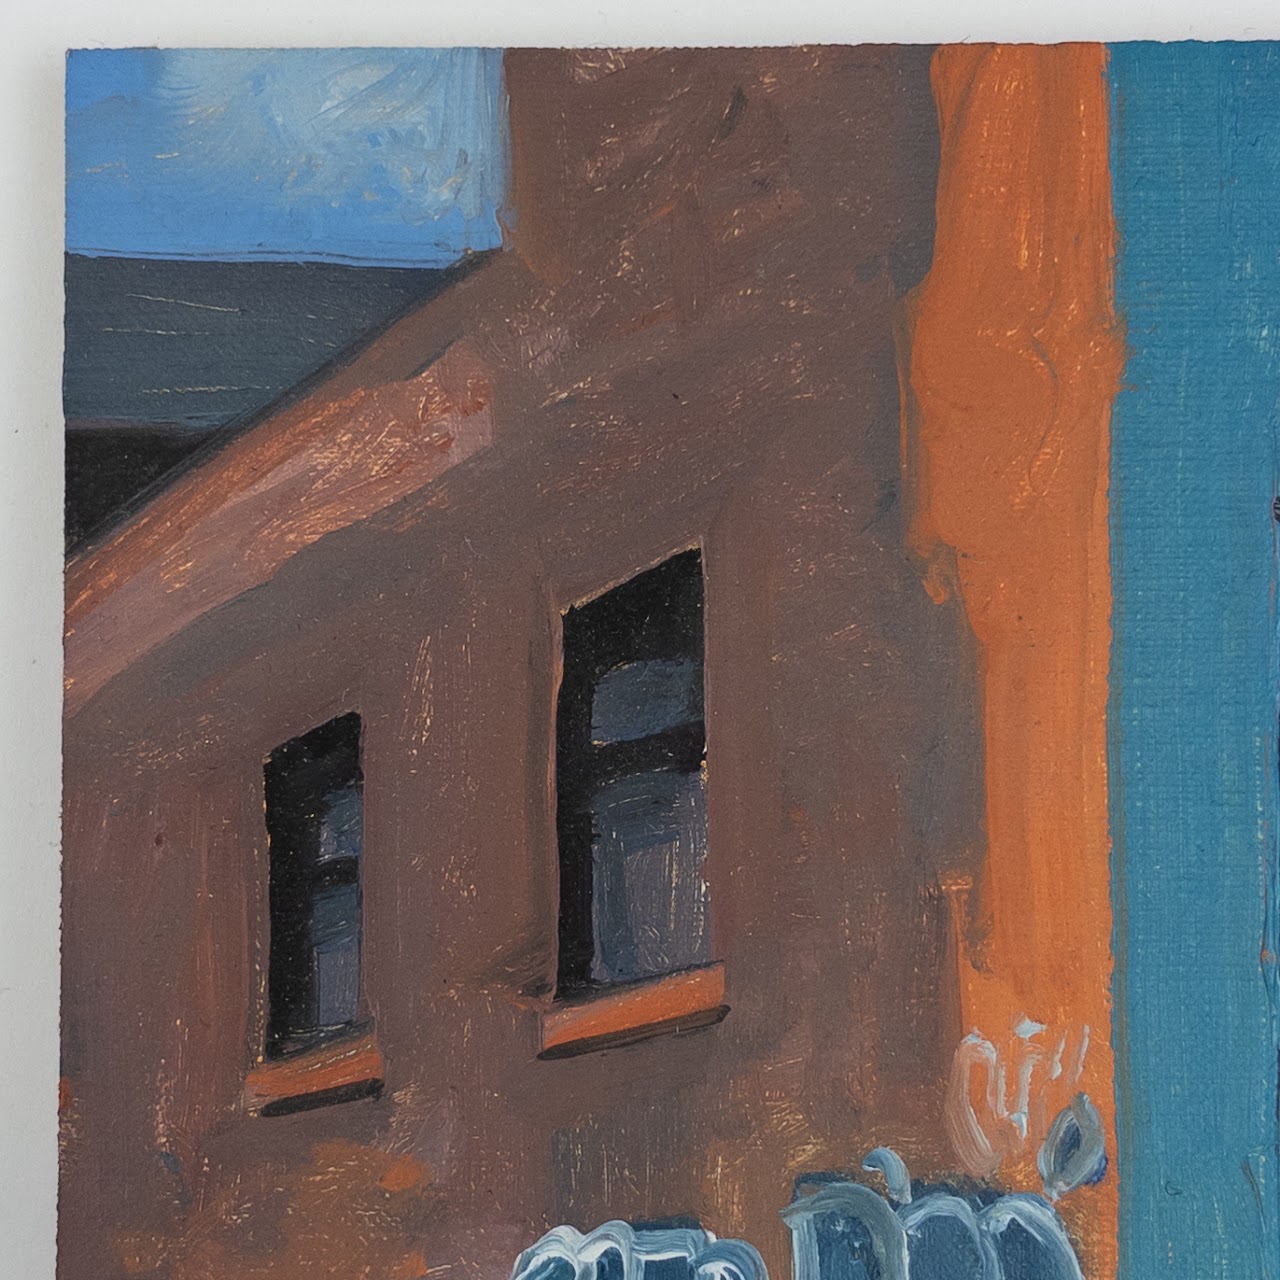 Stephen Magsig "Eastern Market Blue" Small Painting